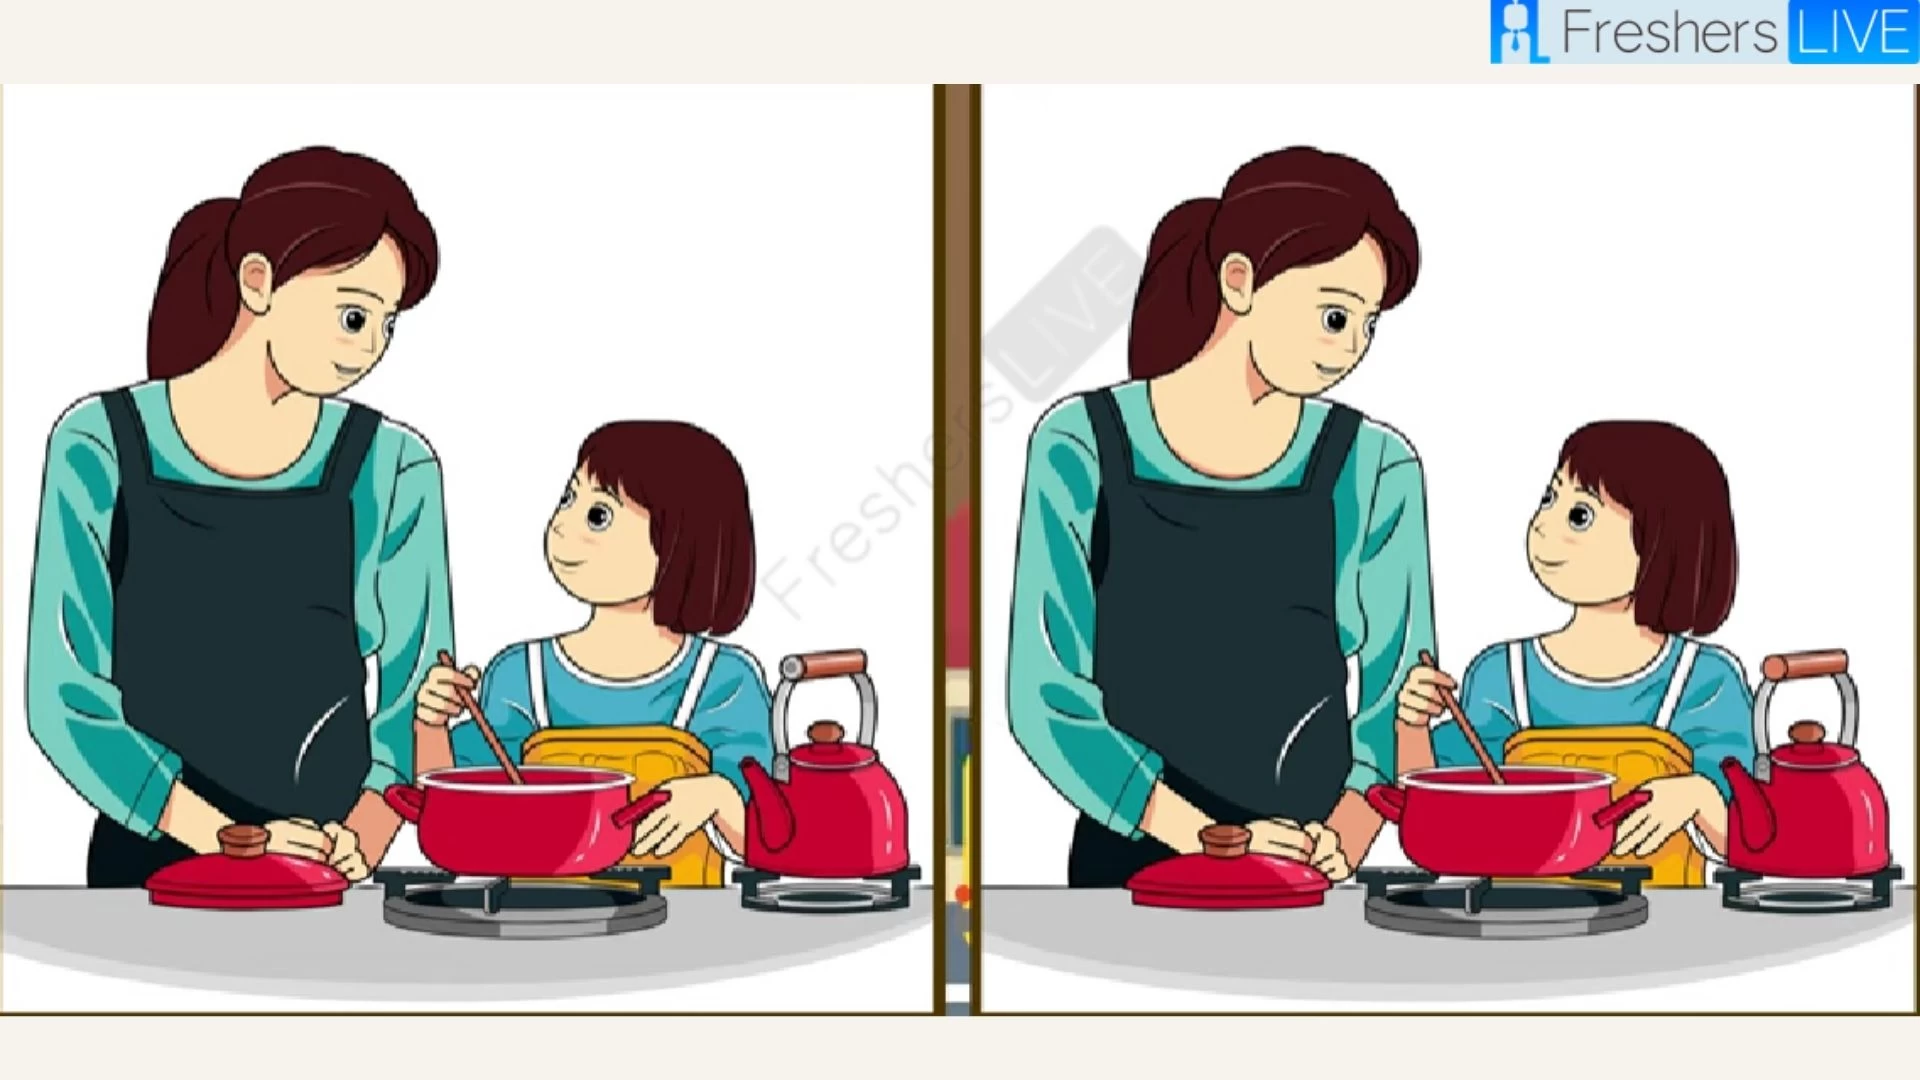 Only 1% of attentive people can spot 3 differences in the Mom daughter picture in 15 Seconds!